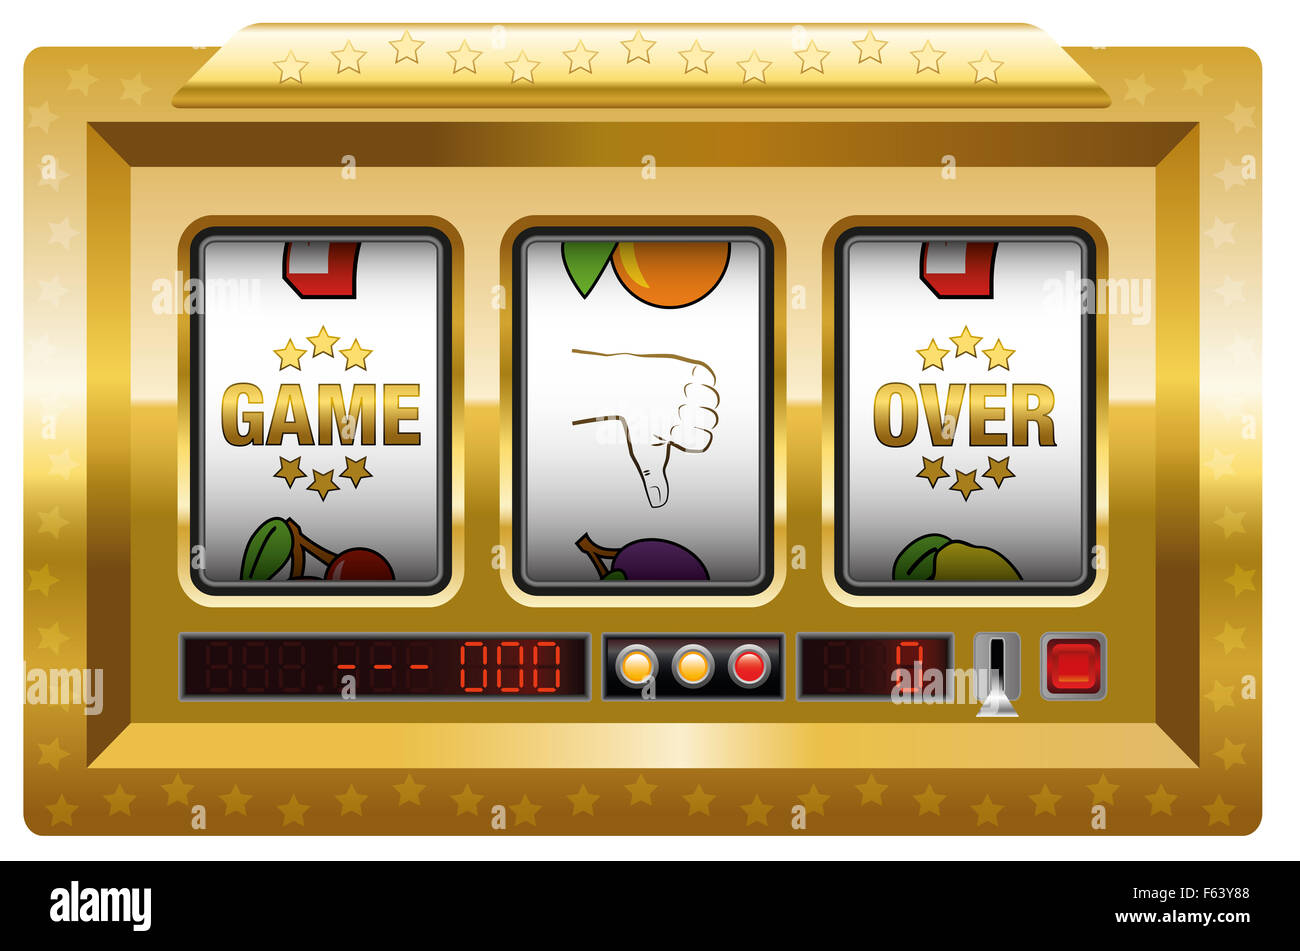 Game over - golden slot machine with three reels lettering GAME OVER and a thumb down symbol. Stock Photo